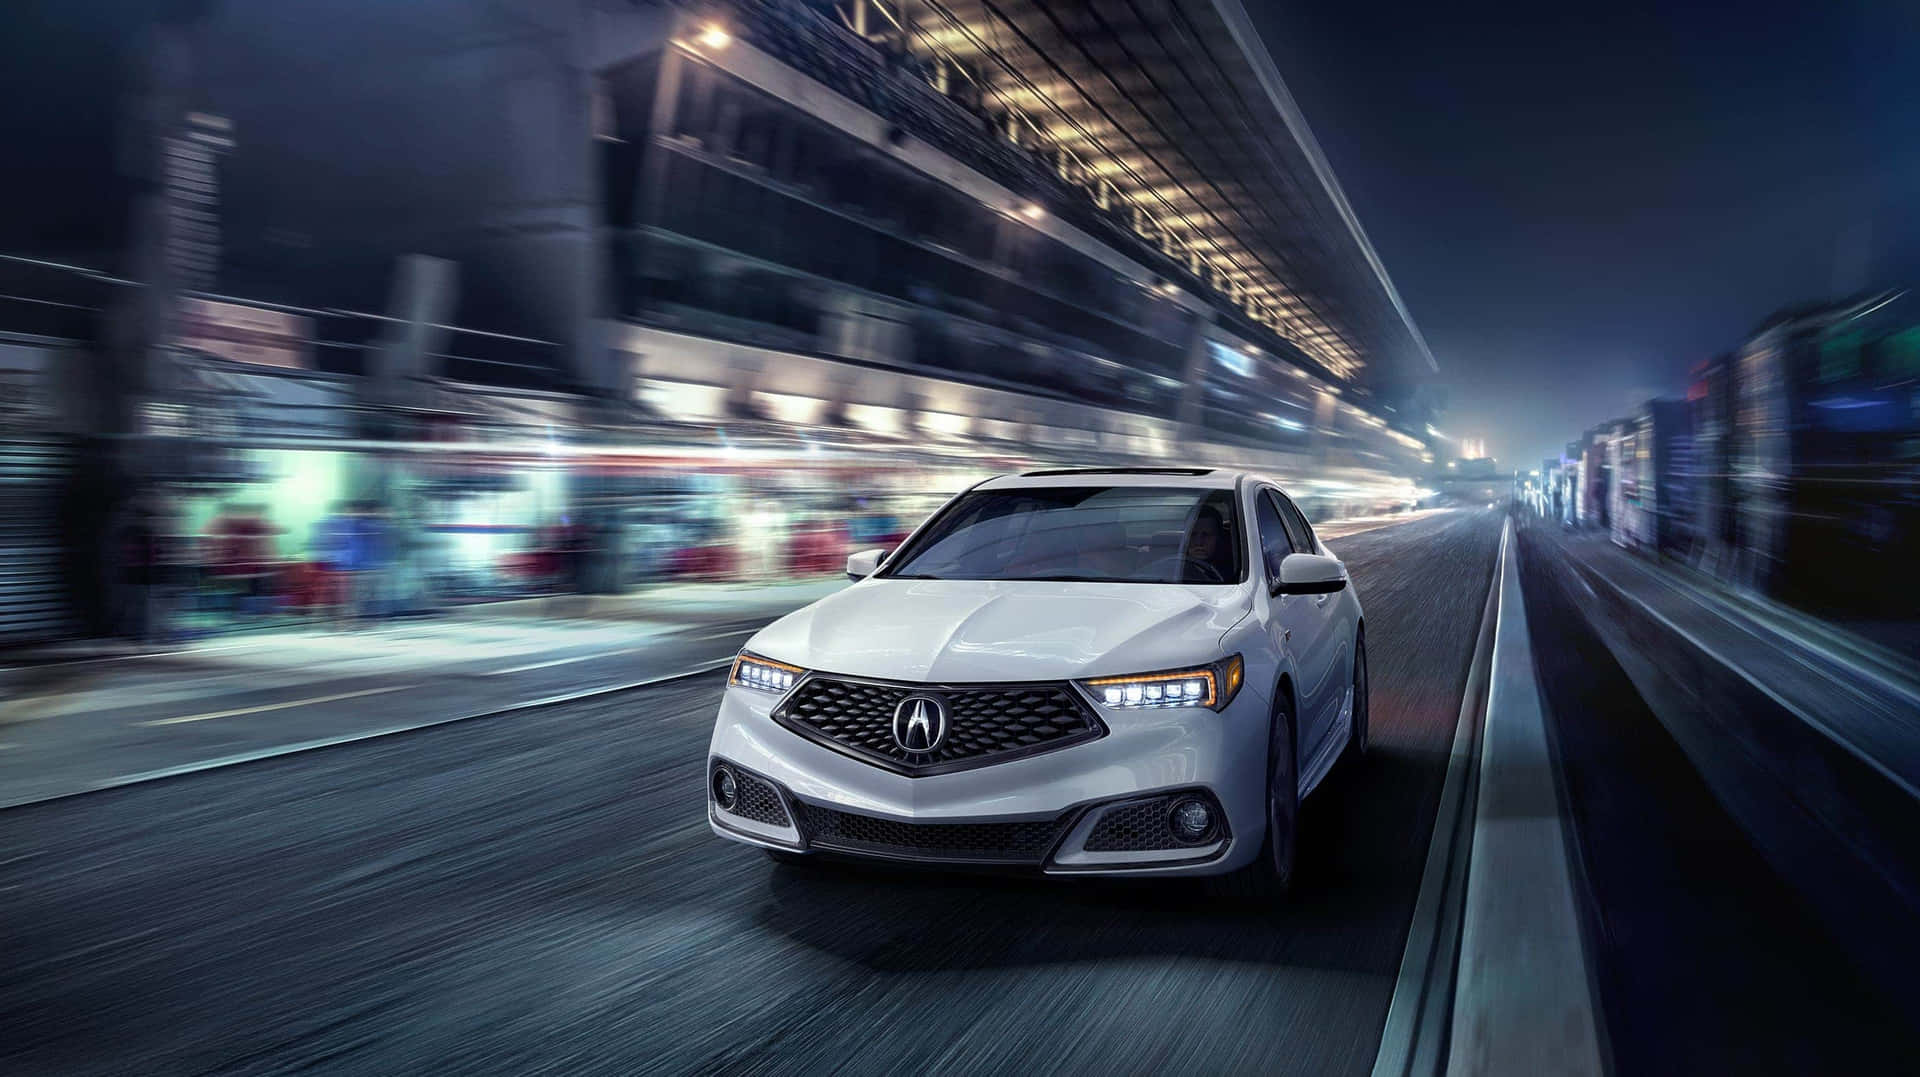 Caption: A Sleek Acura TLX on the Open Road Wallpaper